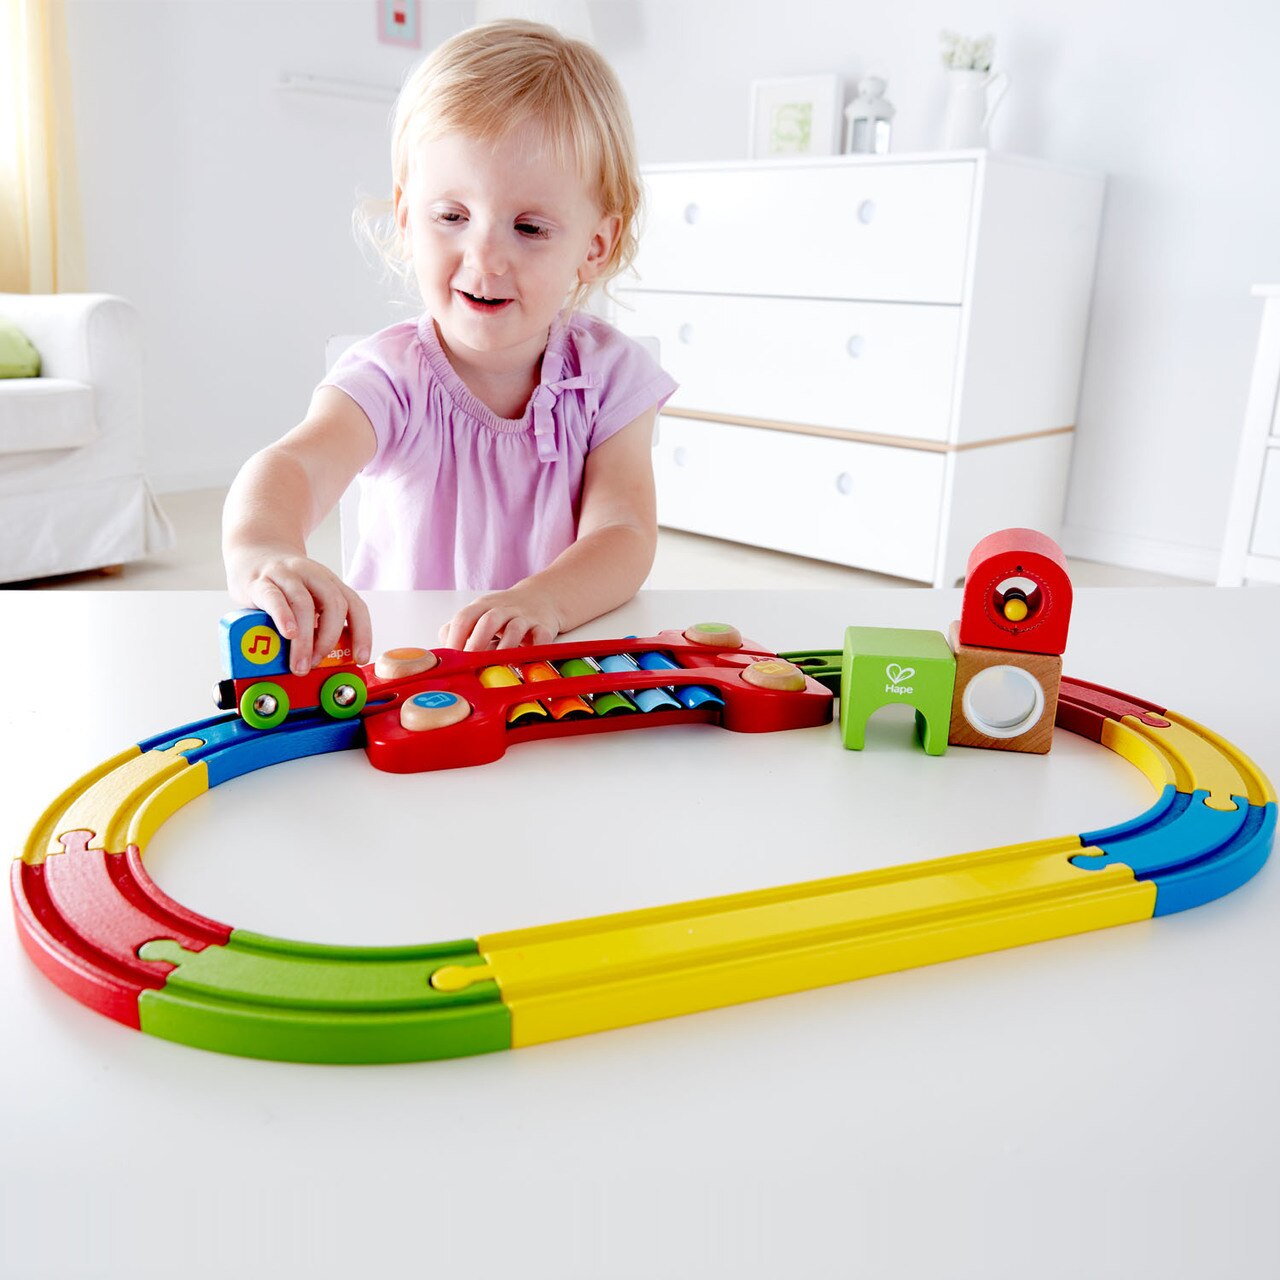 Wooden Train Sets for Boys & Girls